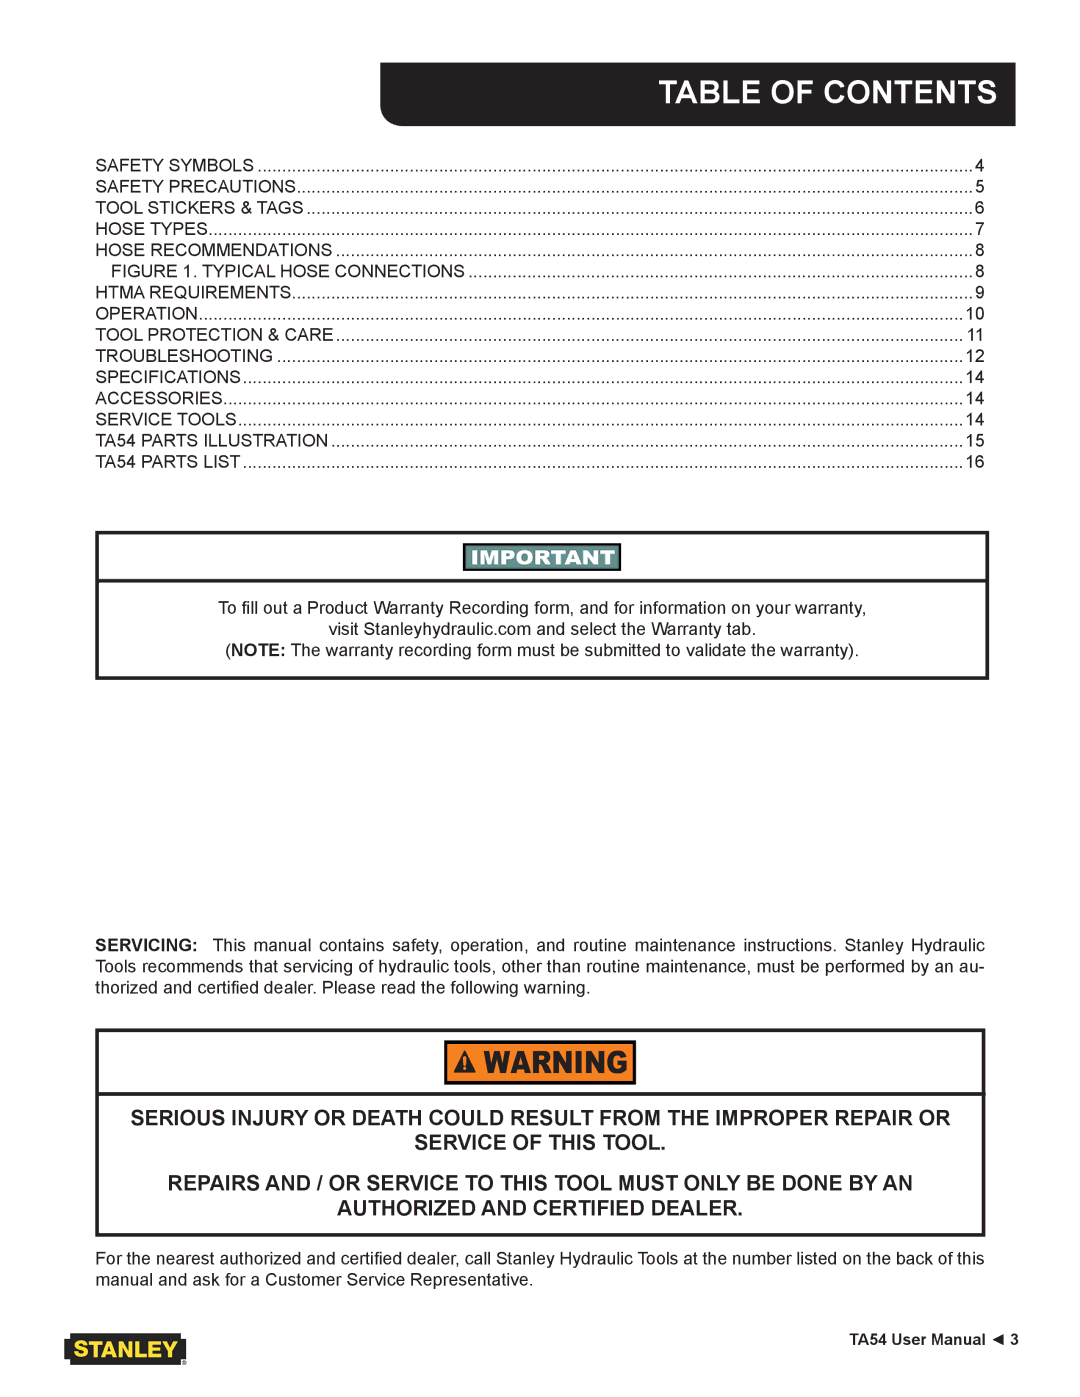 Stanley Black & Decker TA54 user manual Table of Contents 